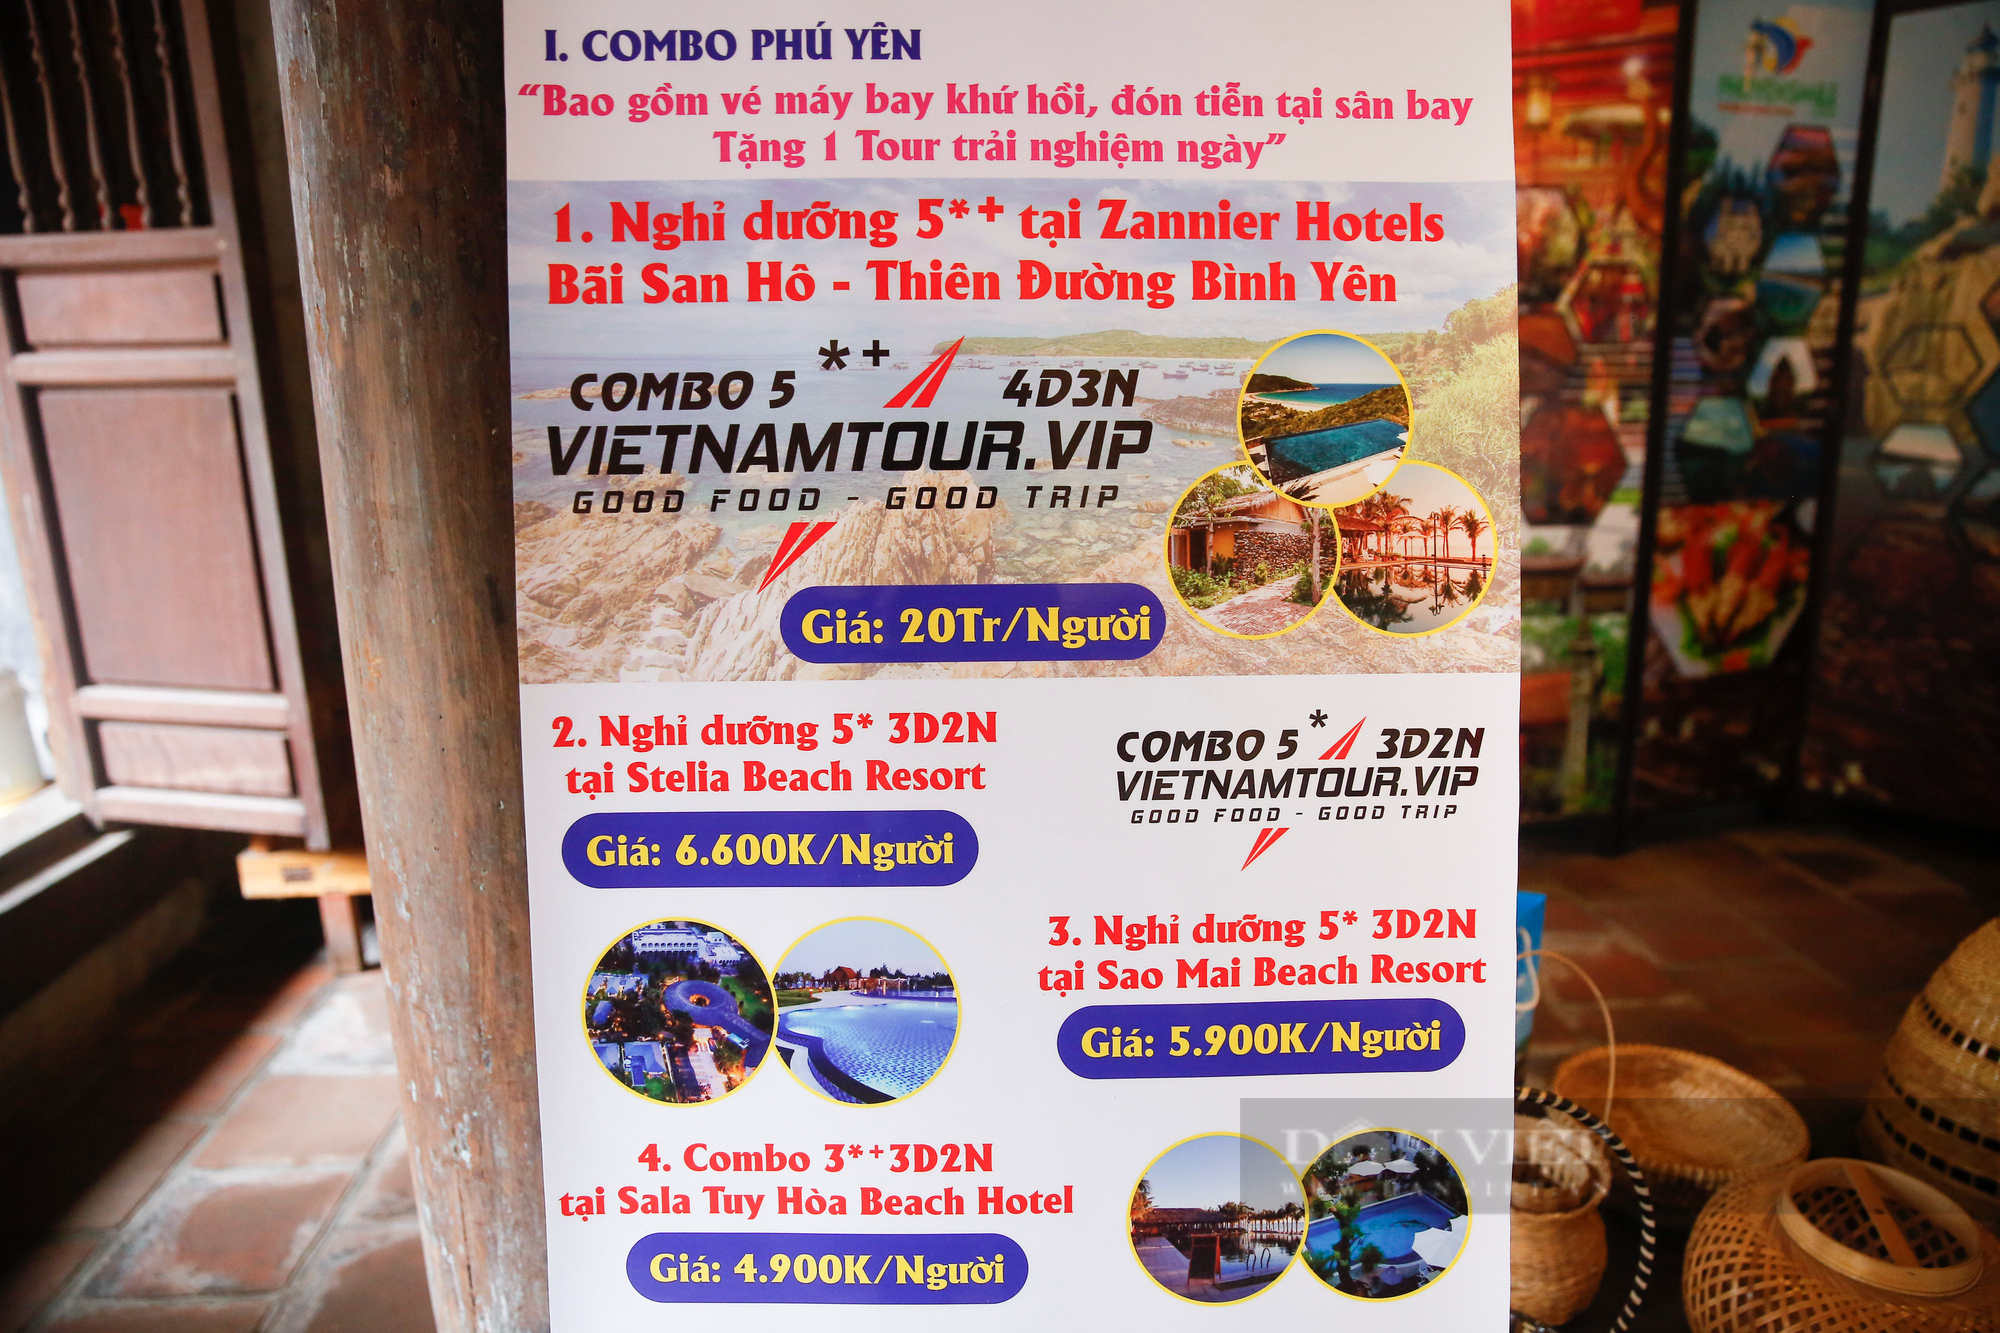 Visit Hanoi's Old Quarter to enjoy many unique cultural activities during the holiday season 30/4-1/5 - Photo 9.